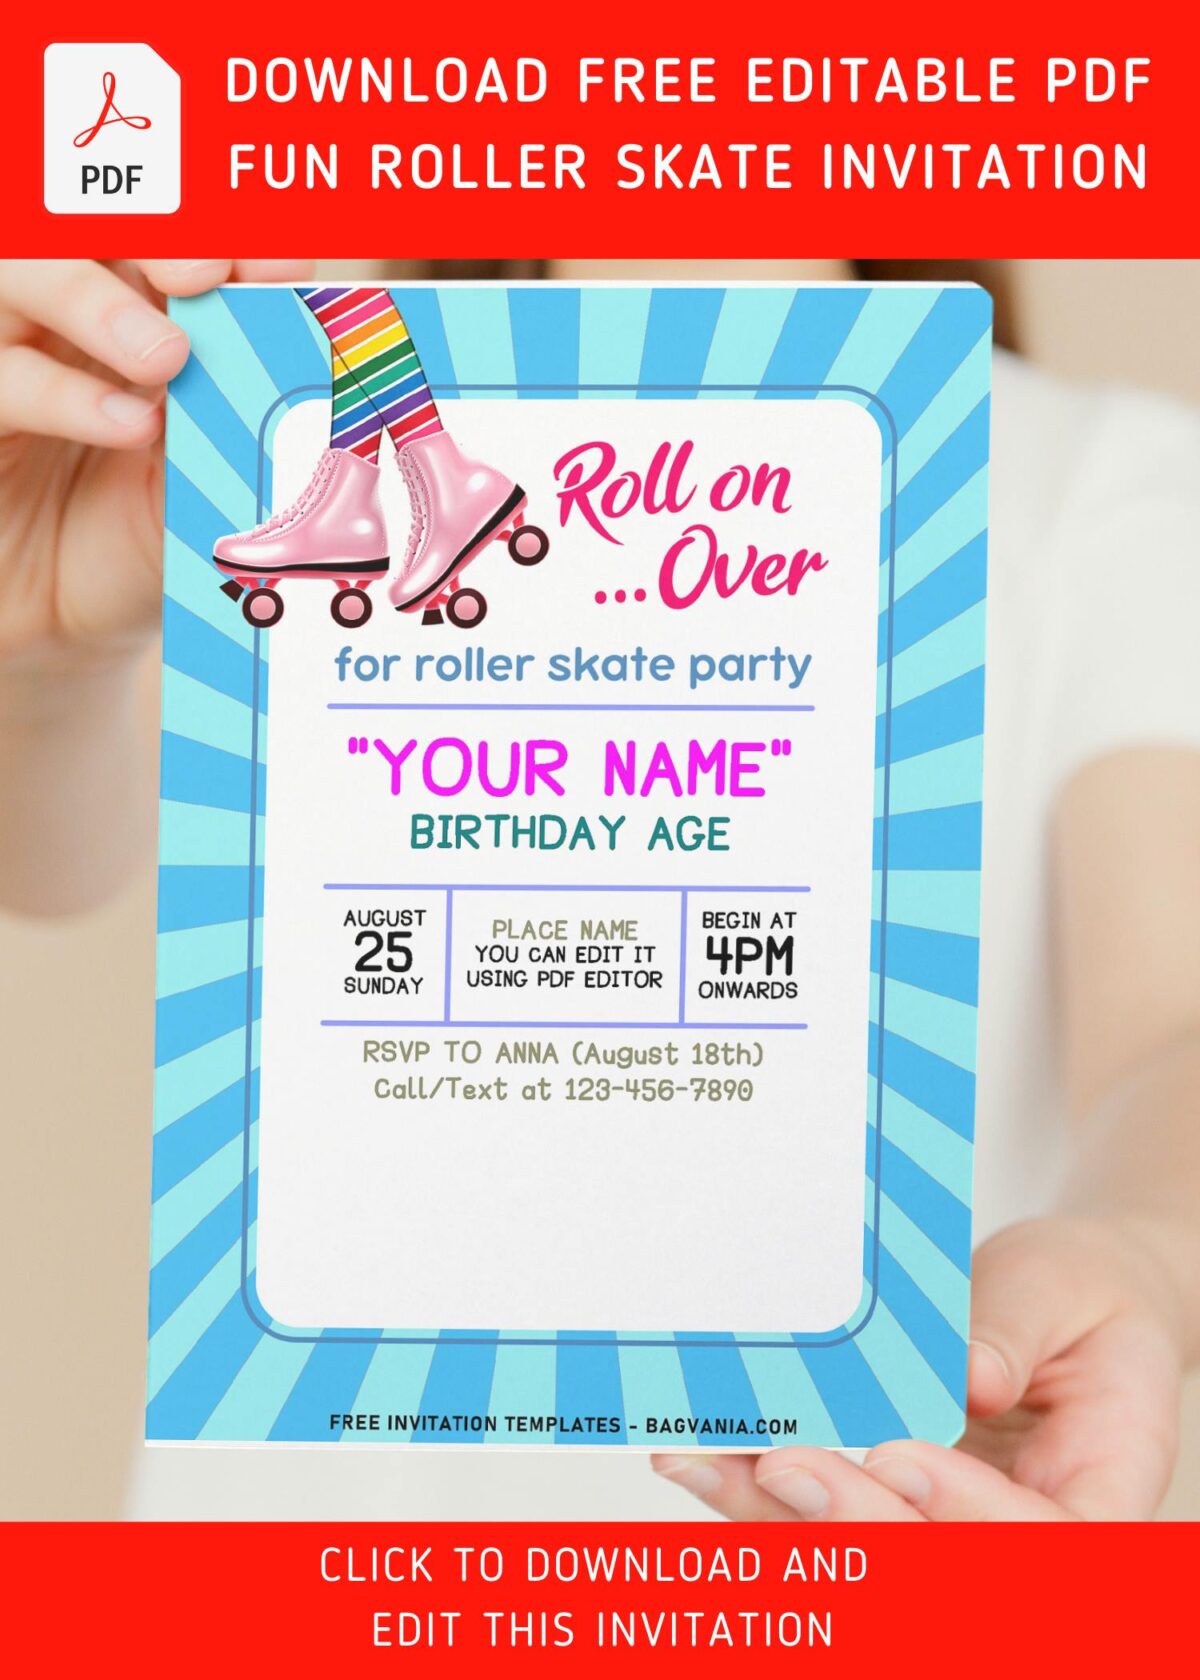 (Free Editable PDF) Cute Pastel Neon Roller Skating Birthday Invitation Templates with cute retro pairs of roller skate boots